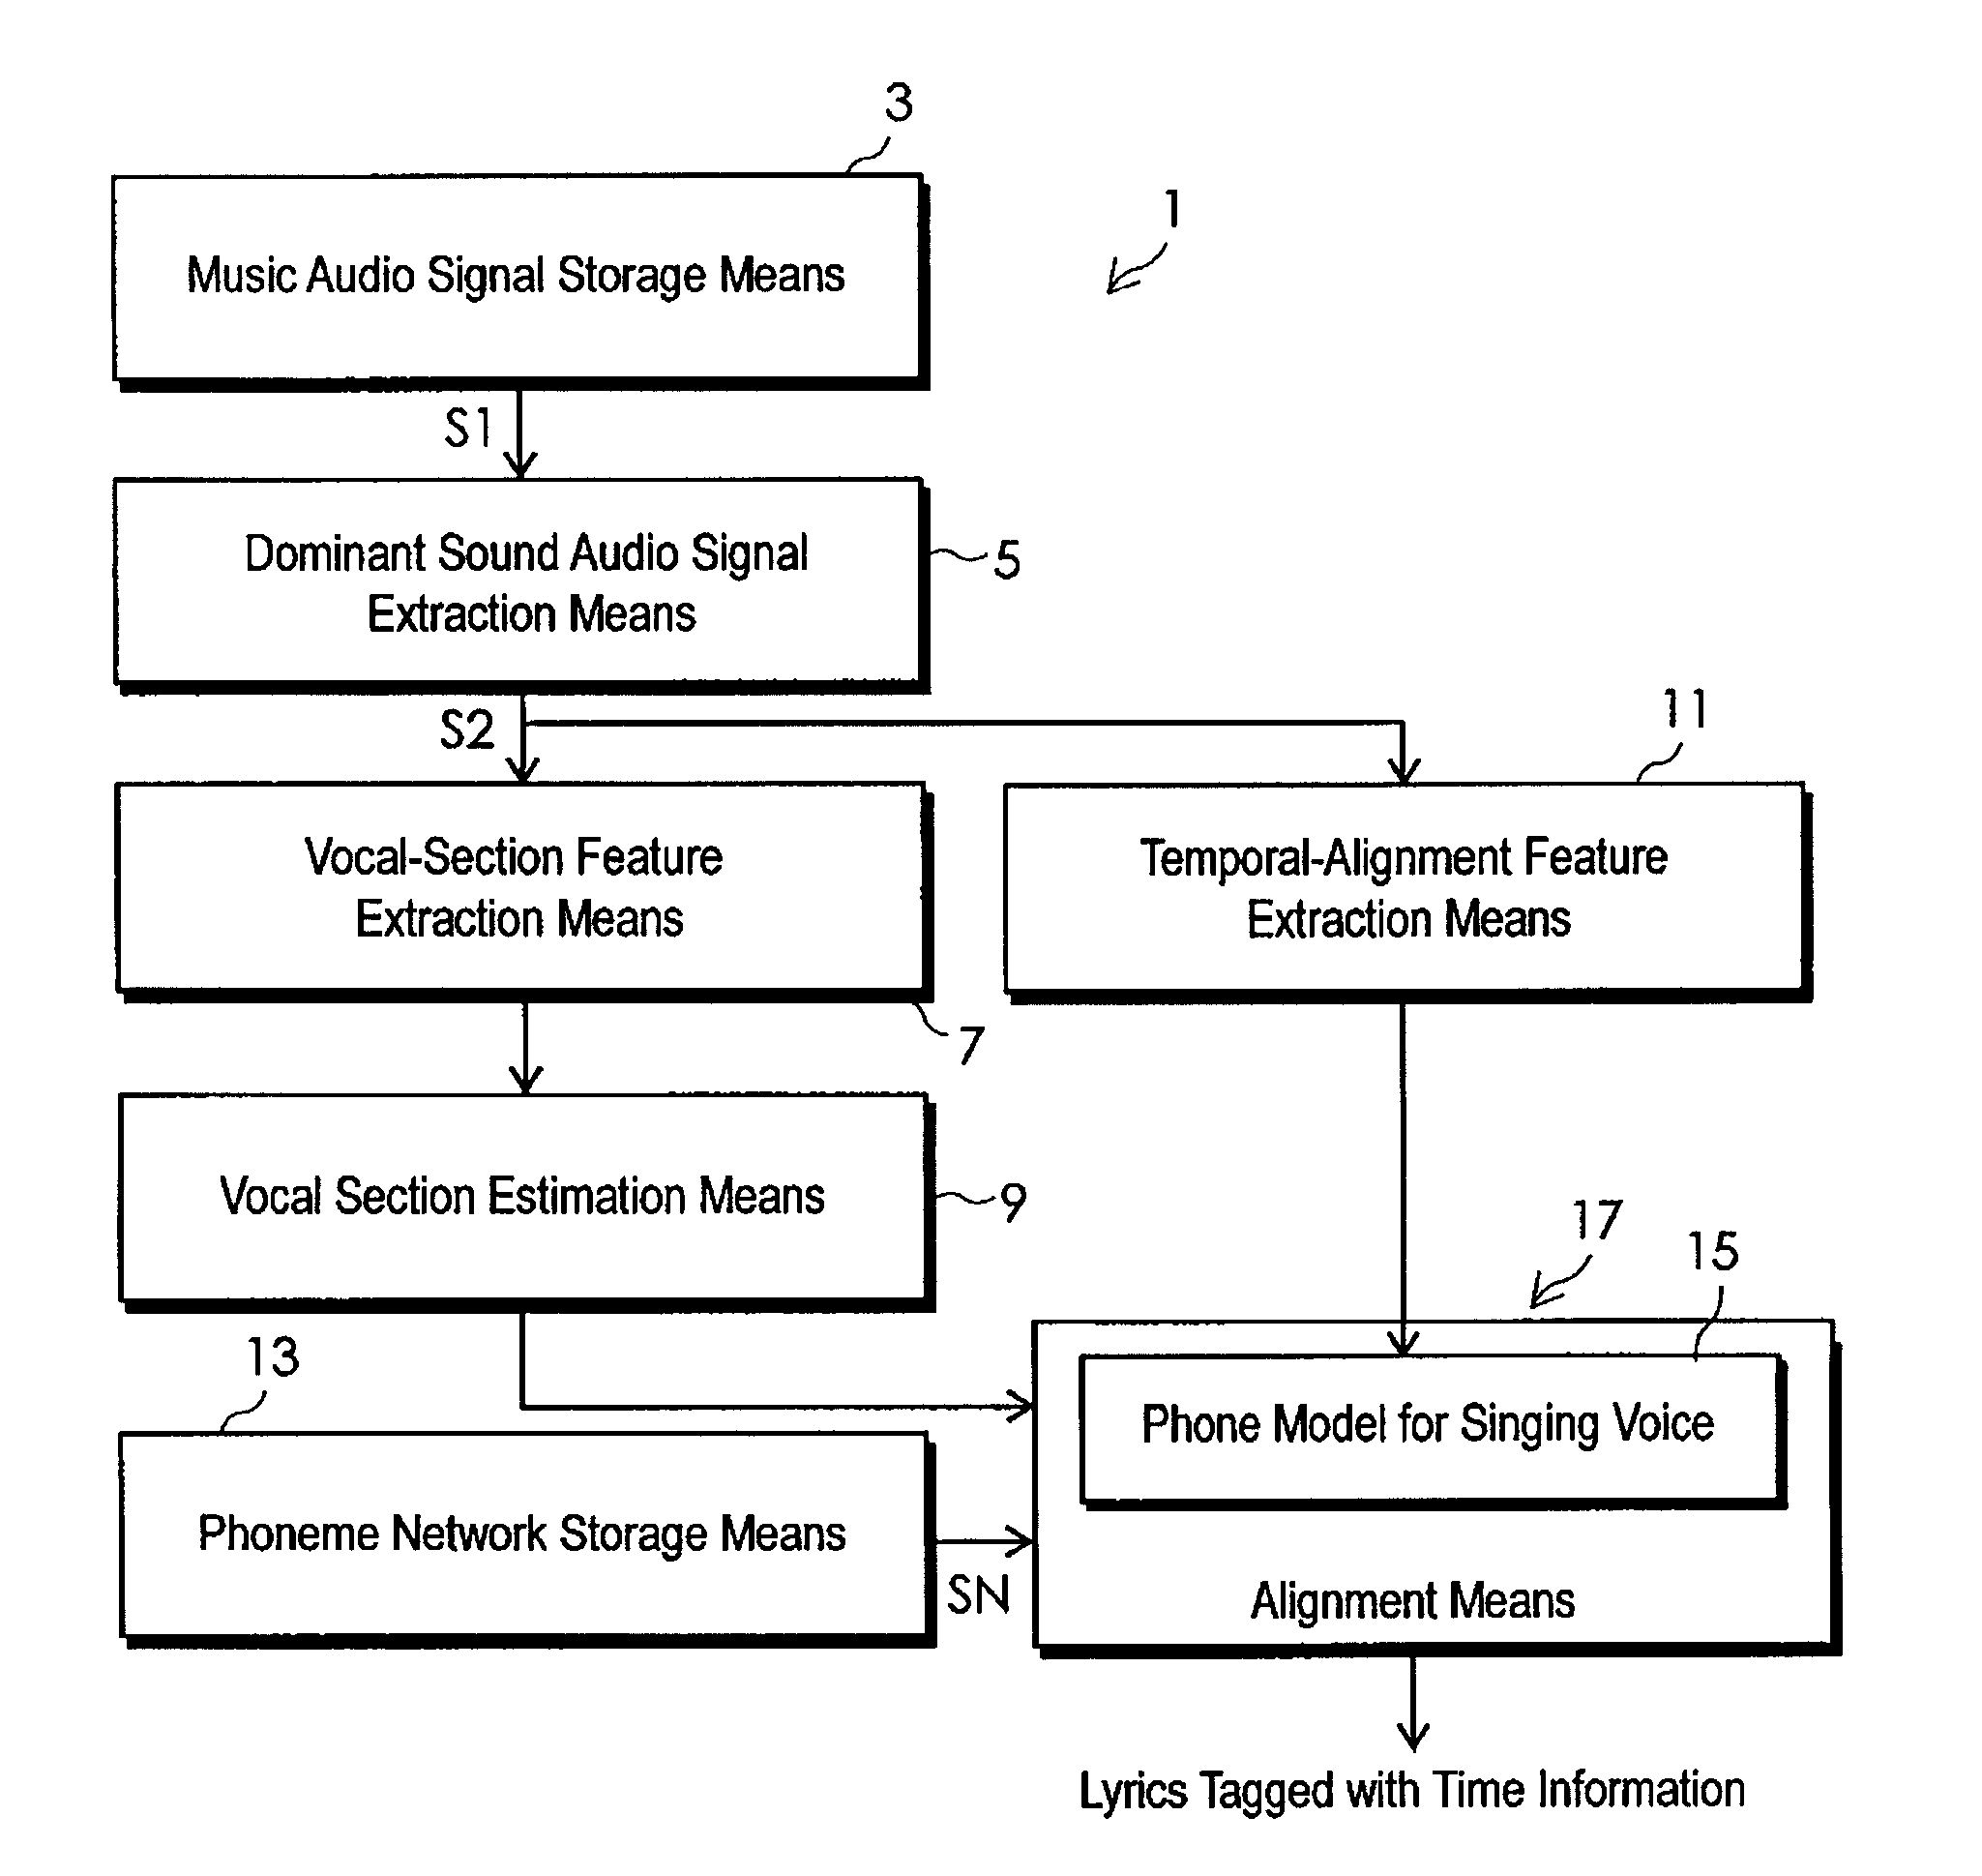 Automatic system for temporal alignment of music audio signal with lyrics